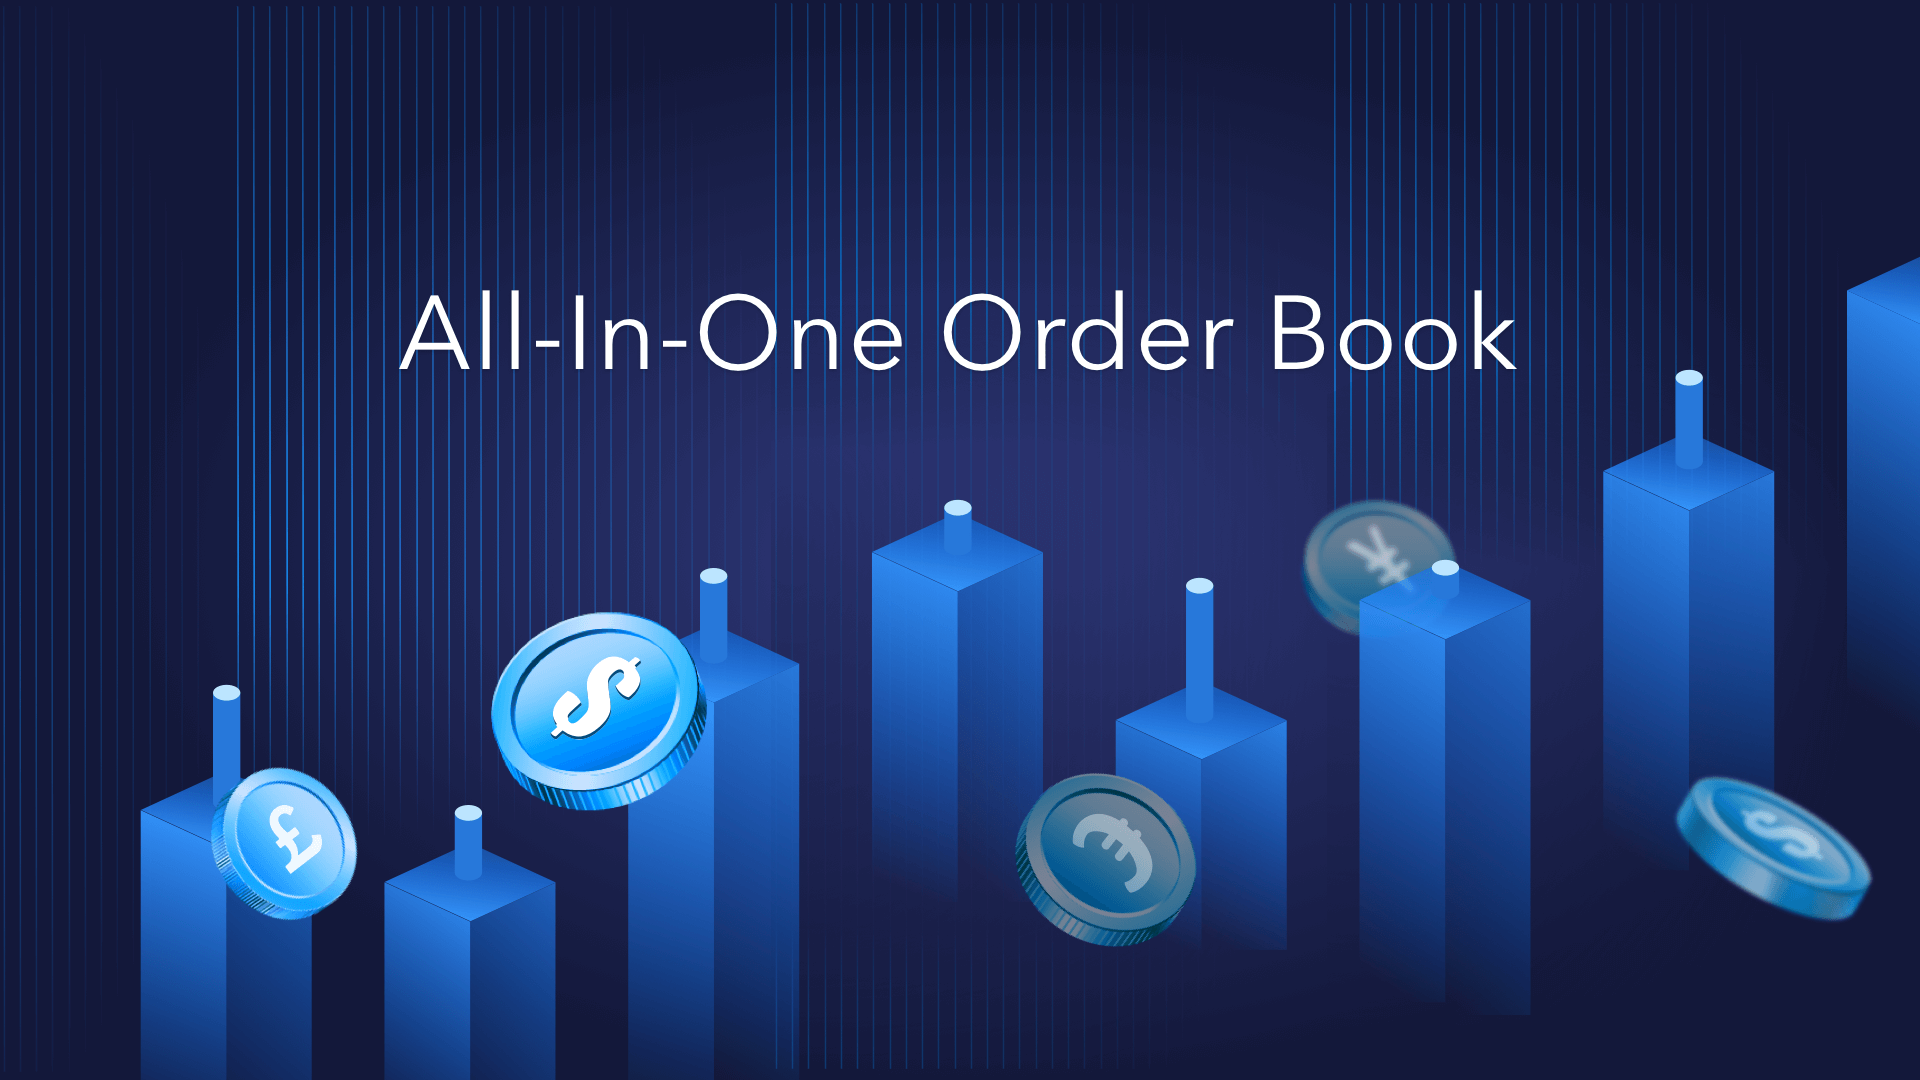 BTSE Launches All-In-One Order Book